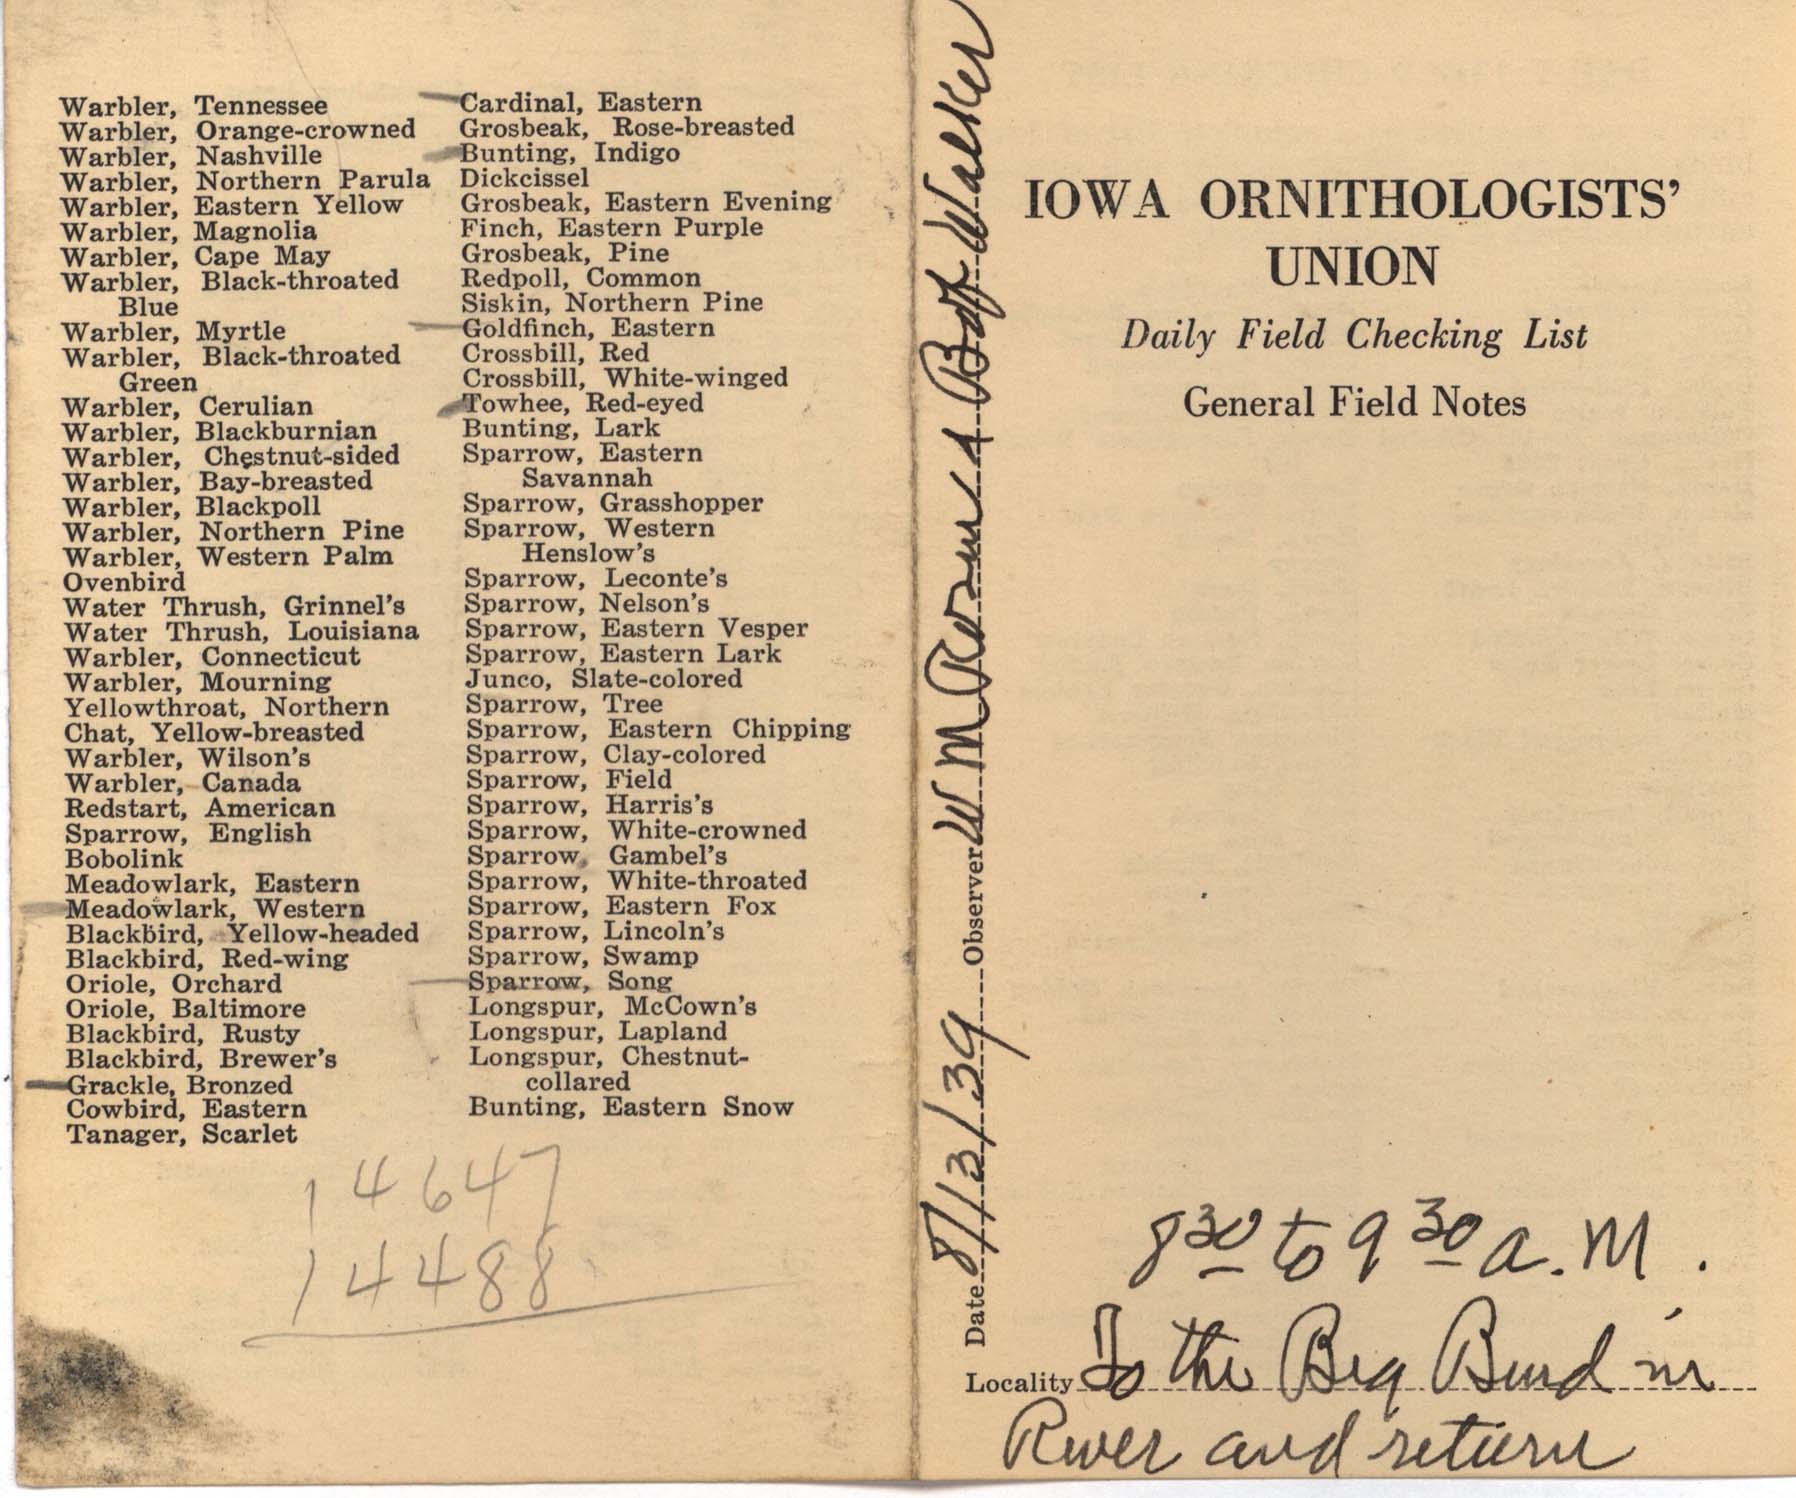 Daily field checking list by Walter Rosene, August 13, 1939